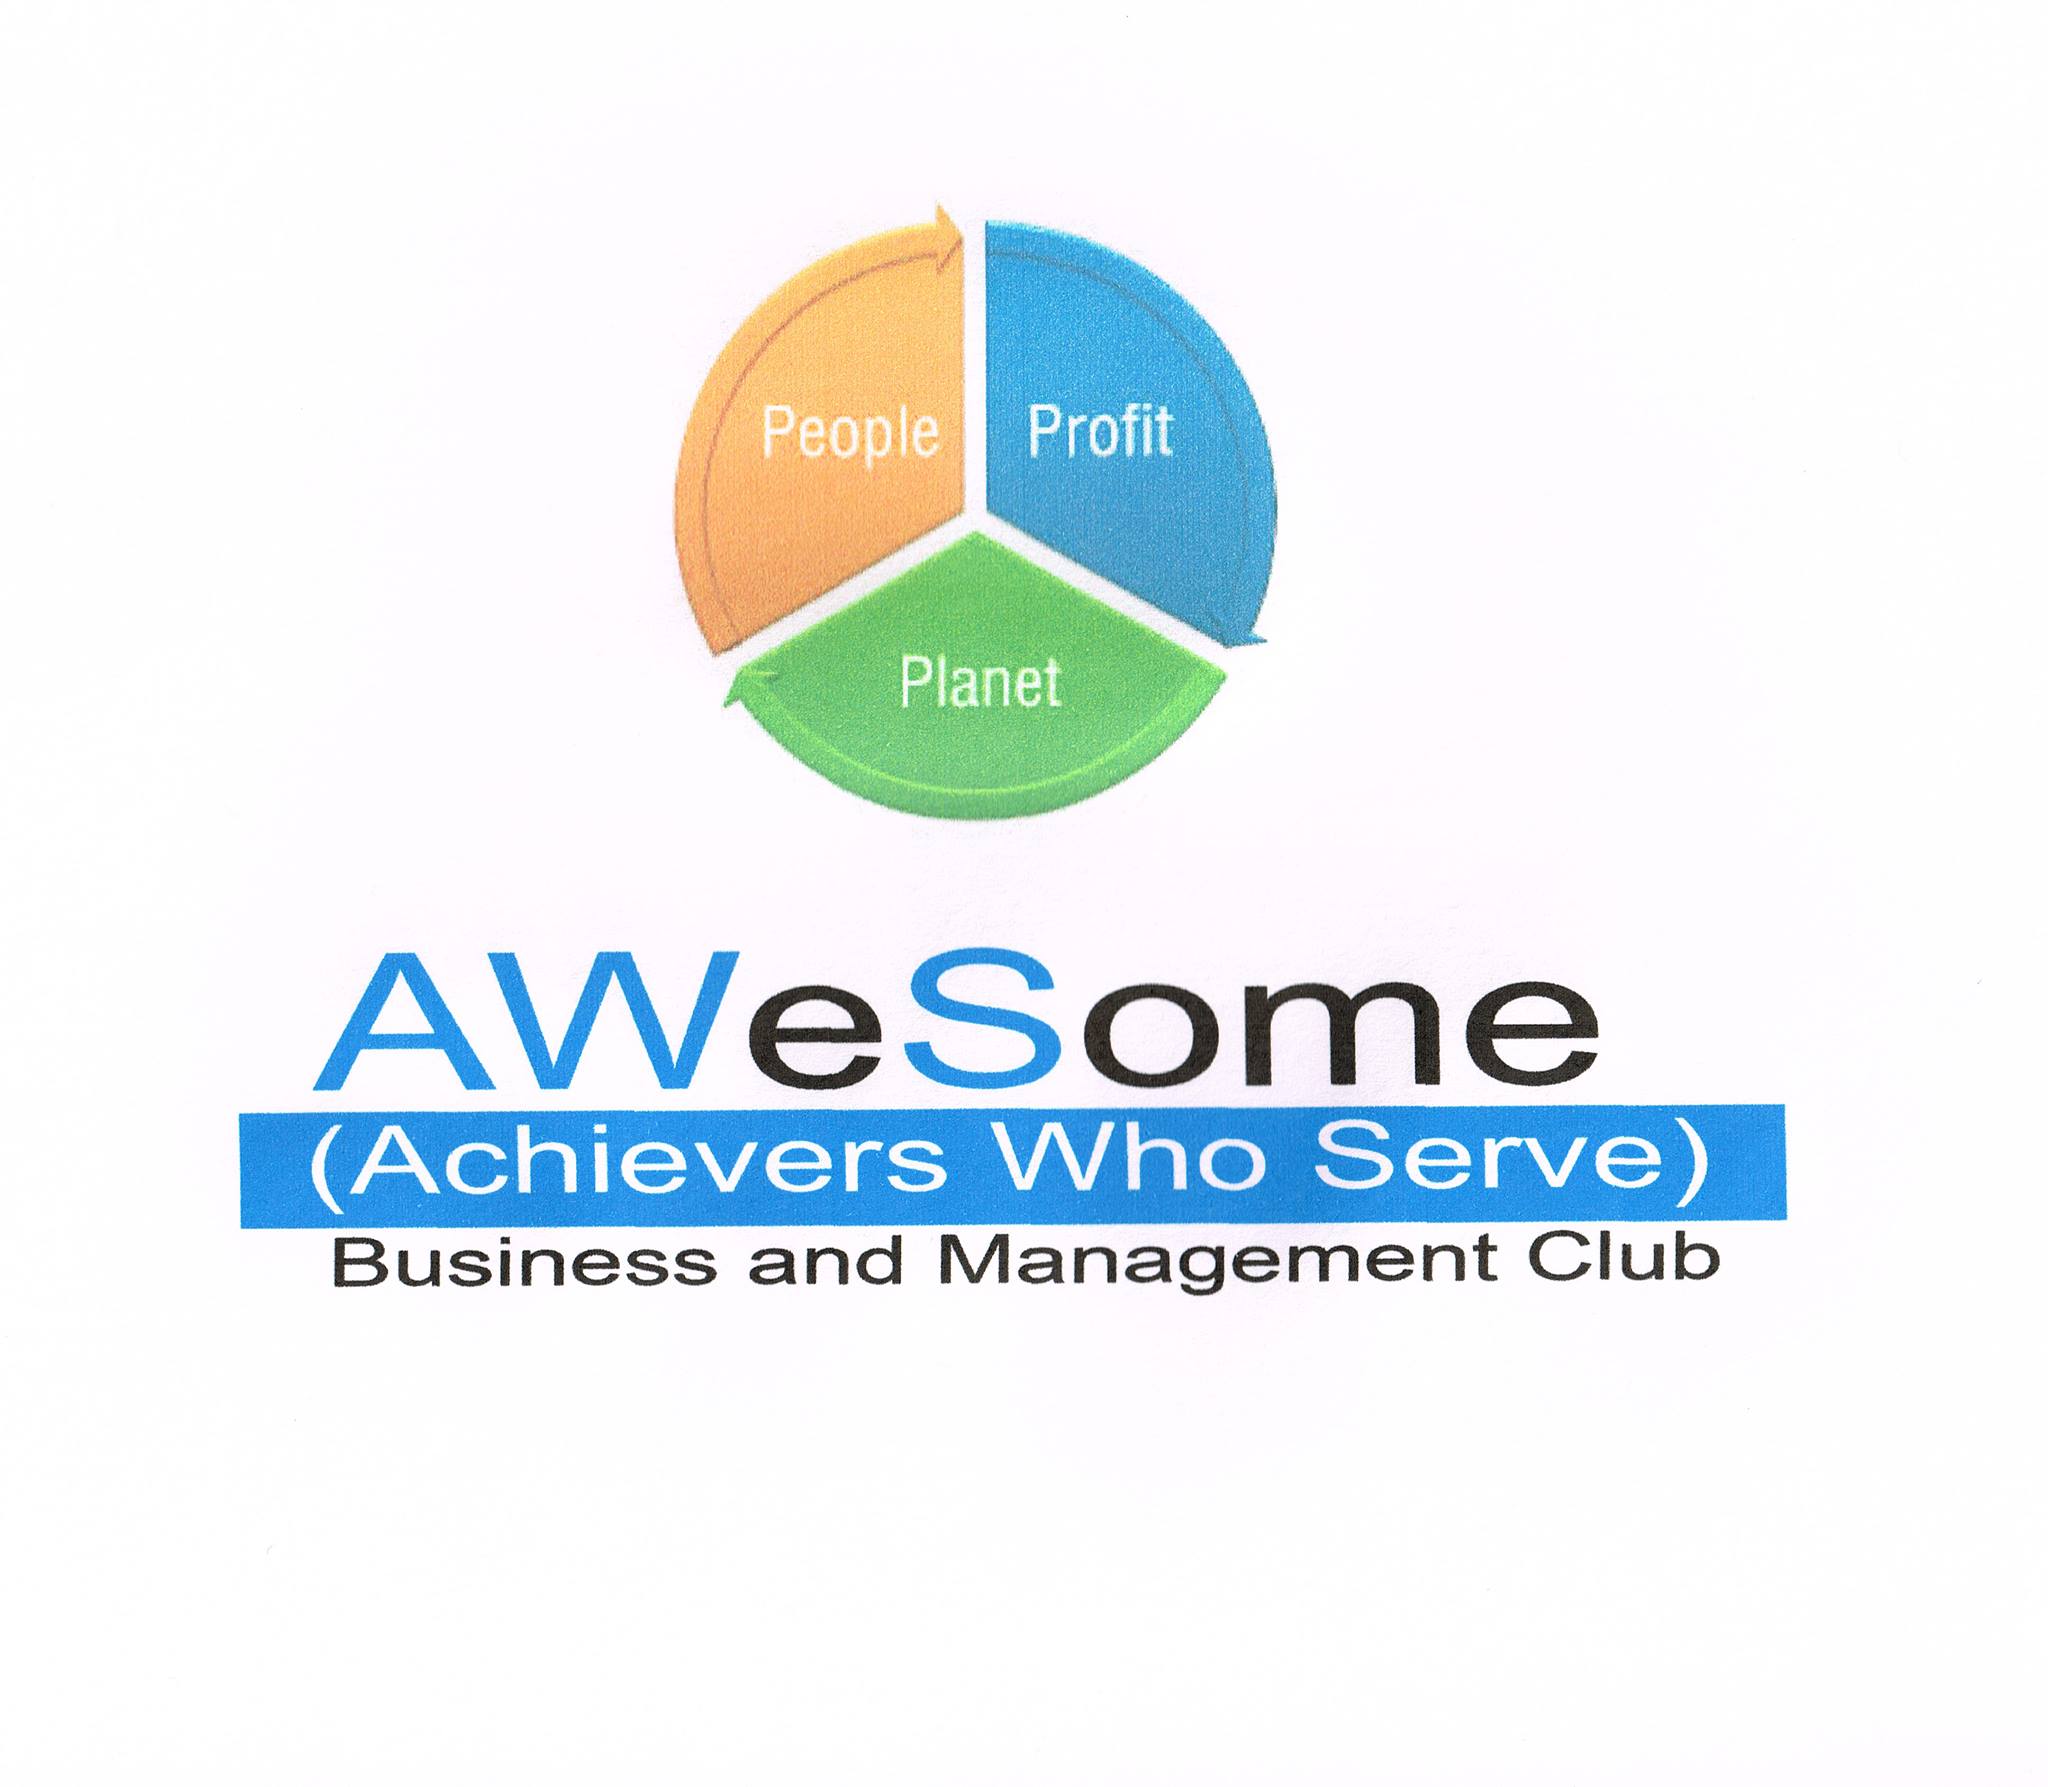 Achievers Who Serve - AWeSome Business and Management Club